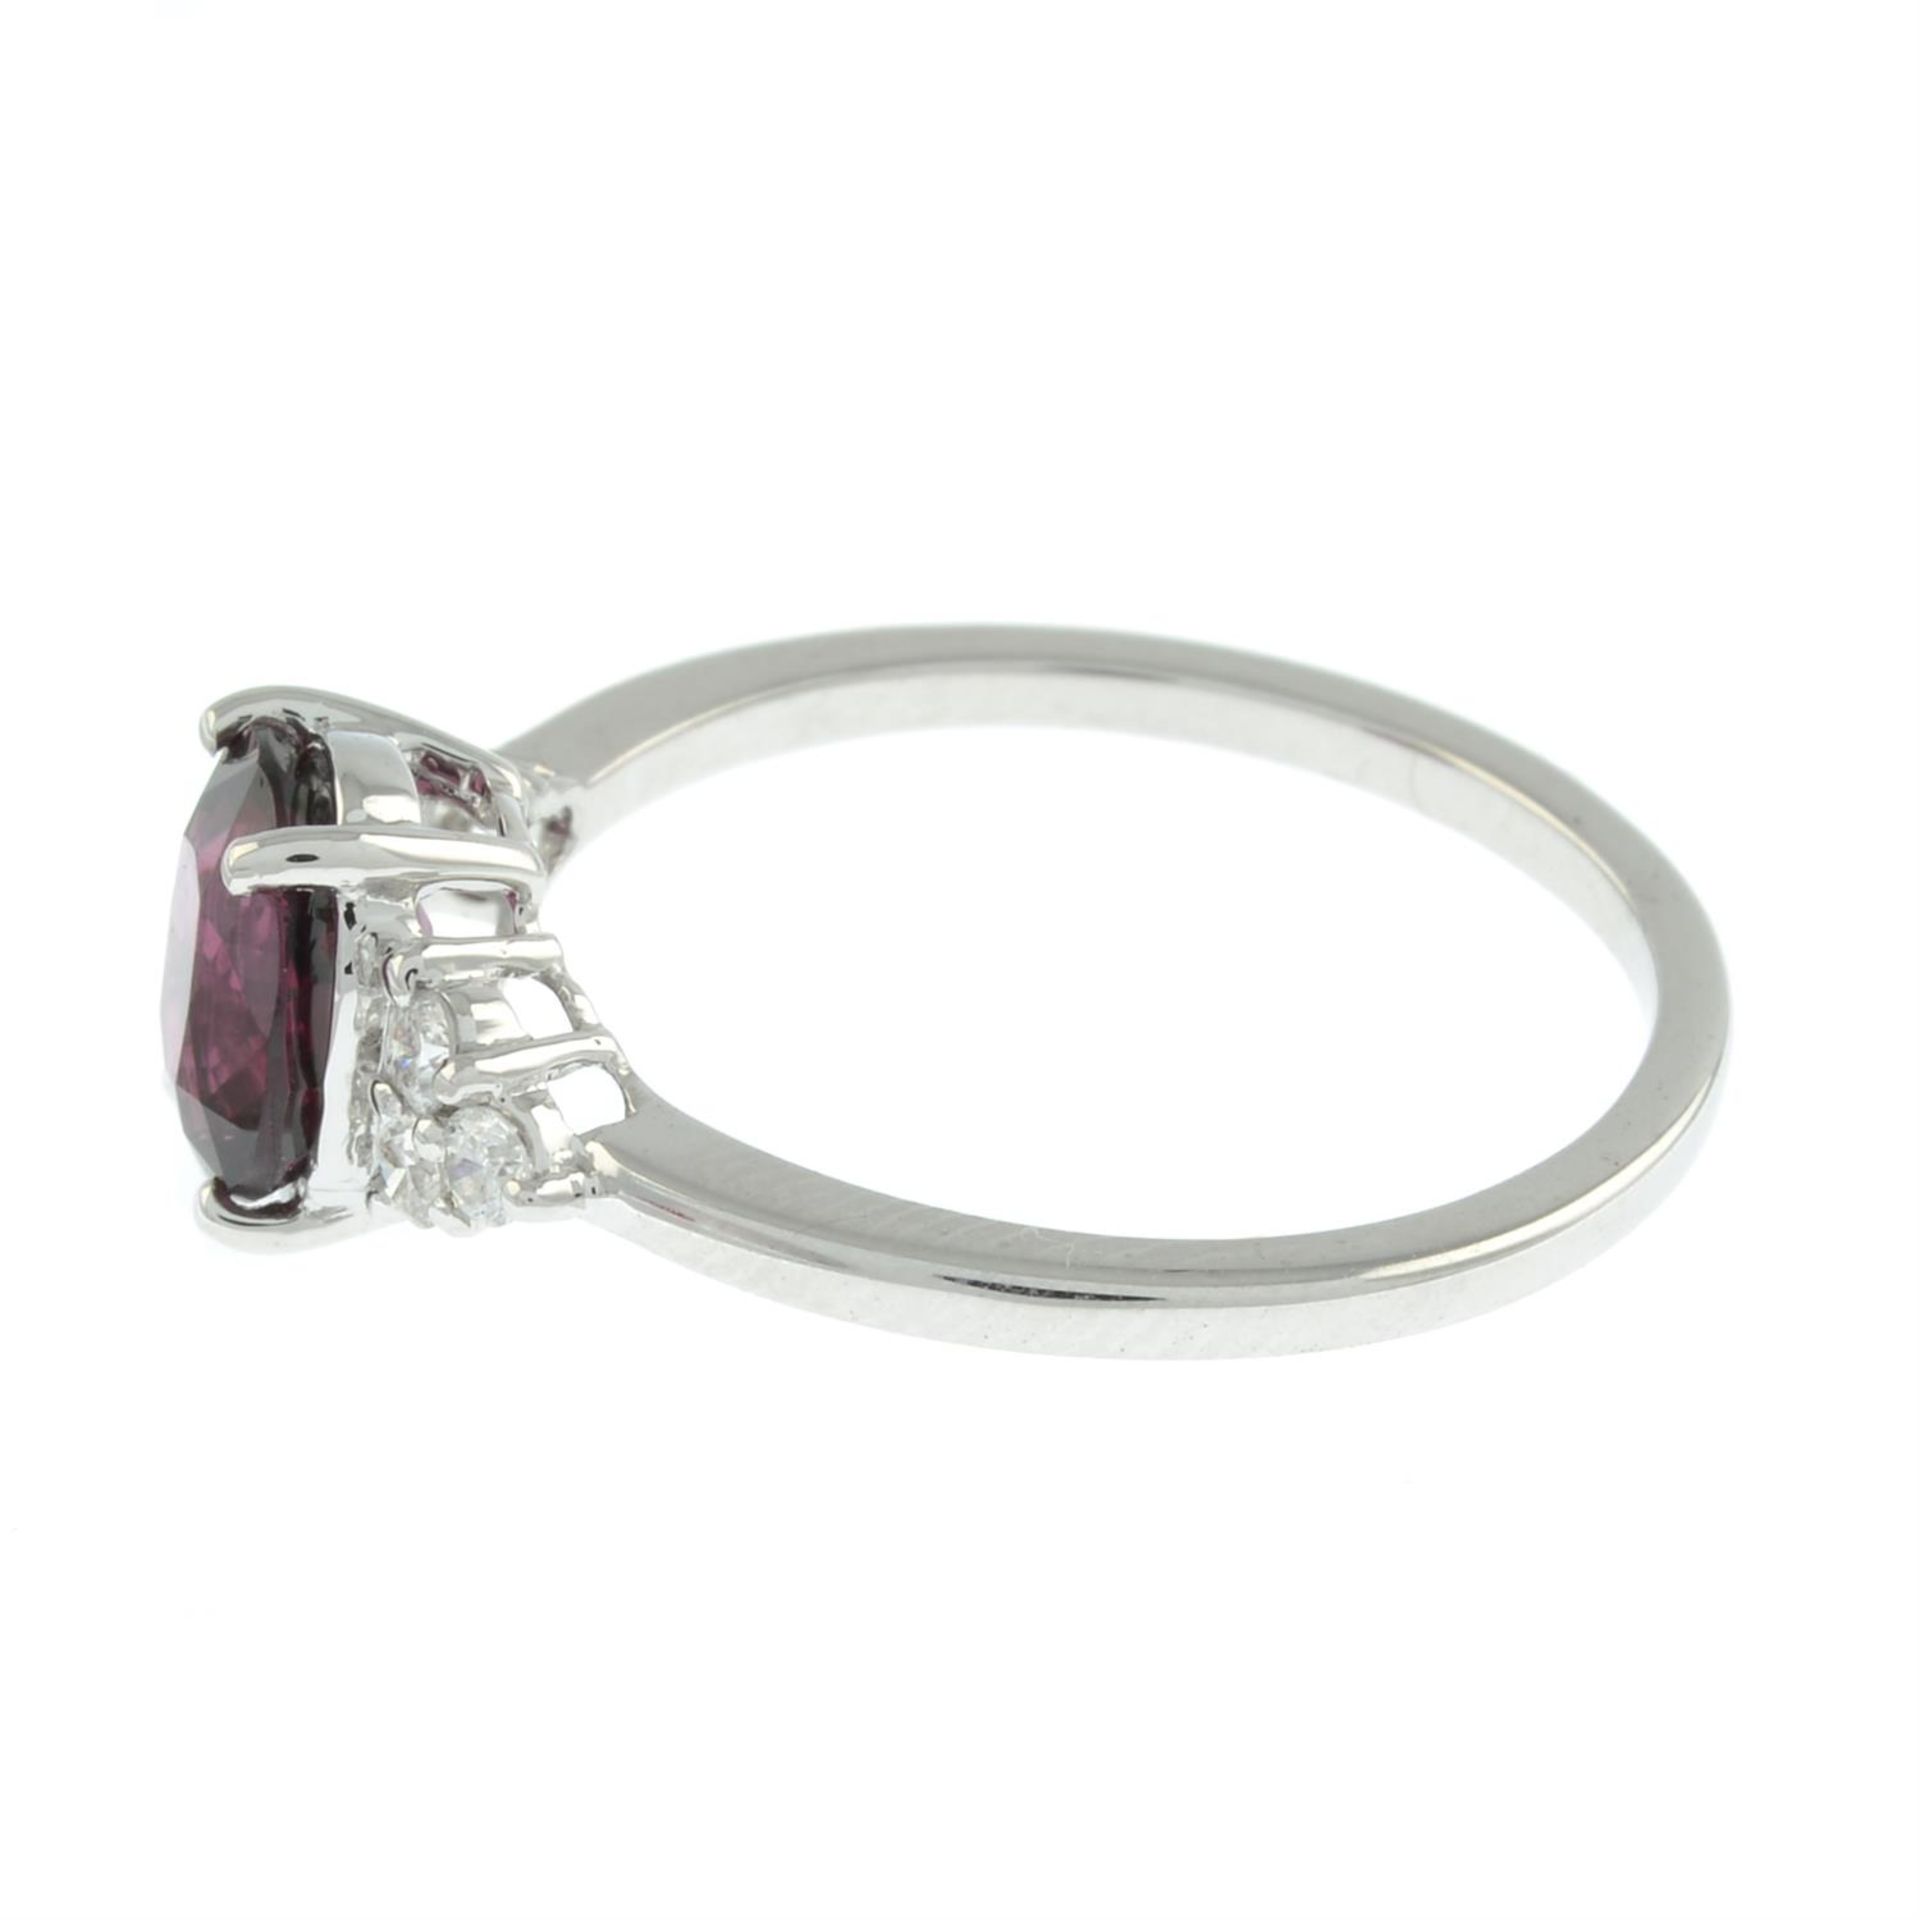 Red spinel and diamond ring - Image 4 of 5